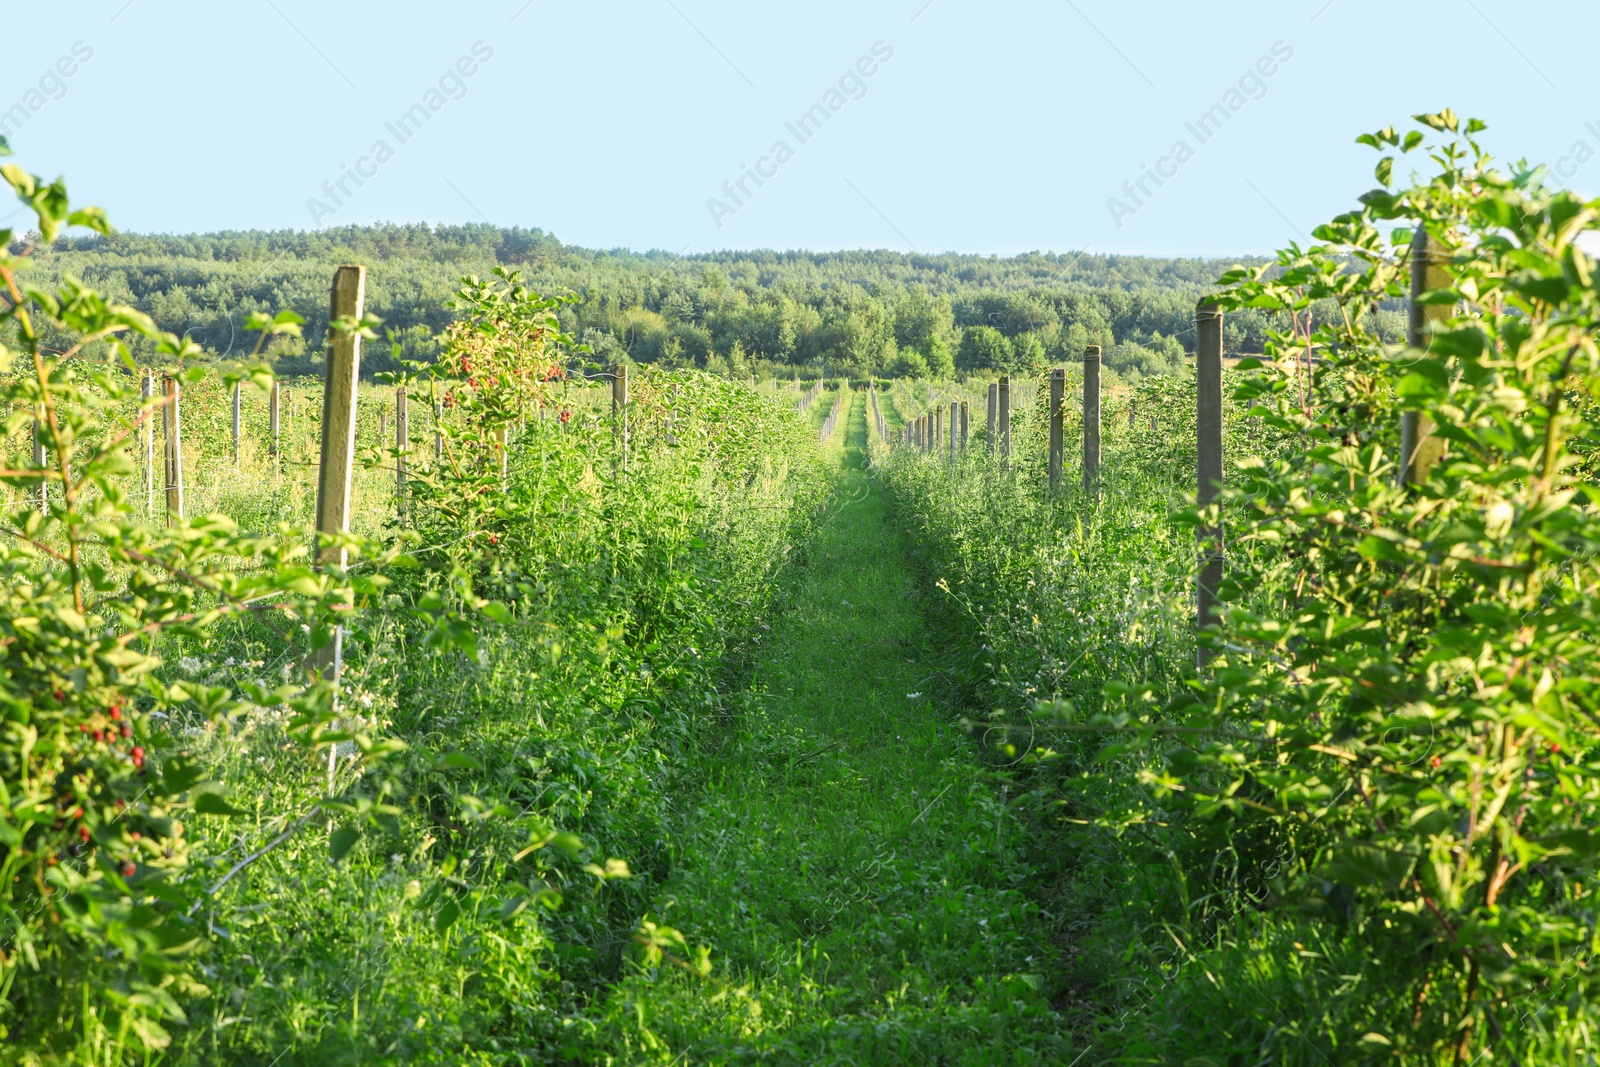 Photo of Green blackberry bushes growing outdoors on sunny day